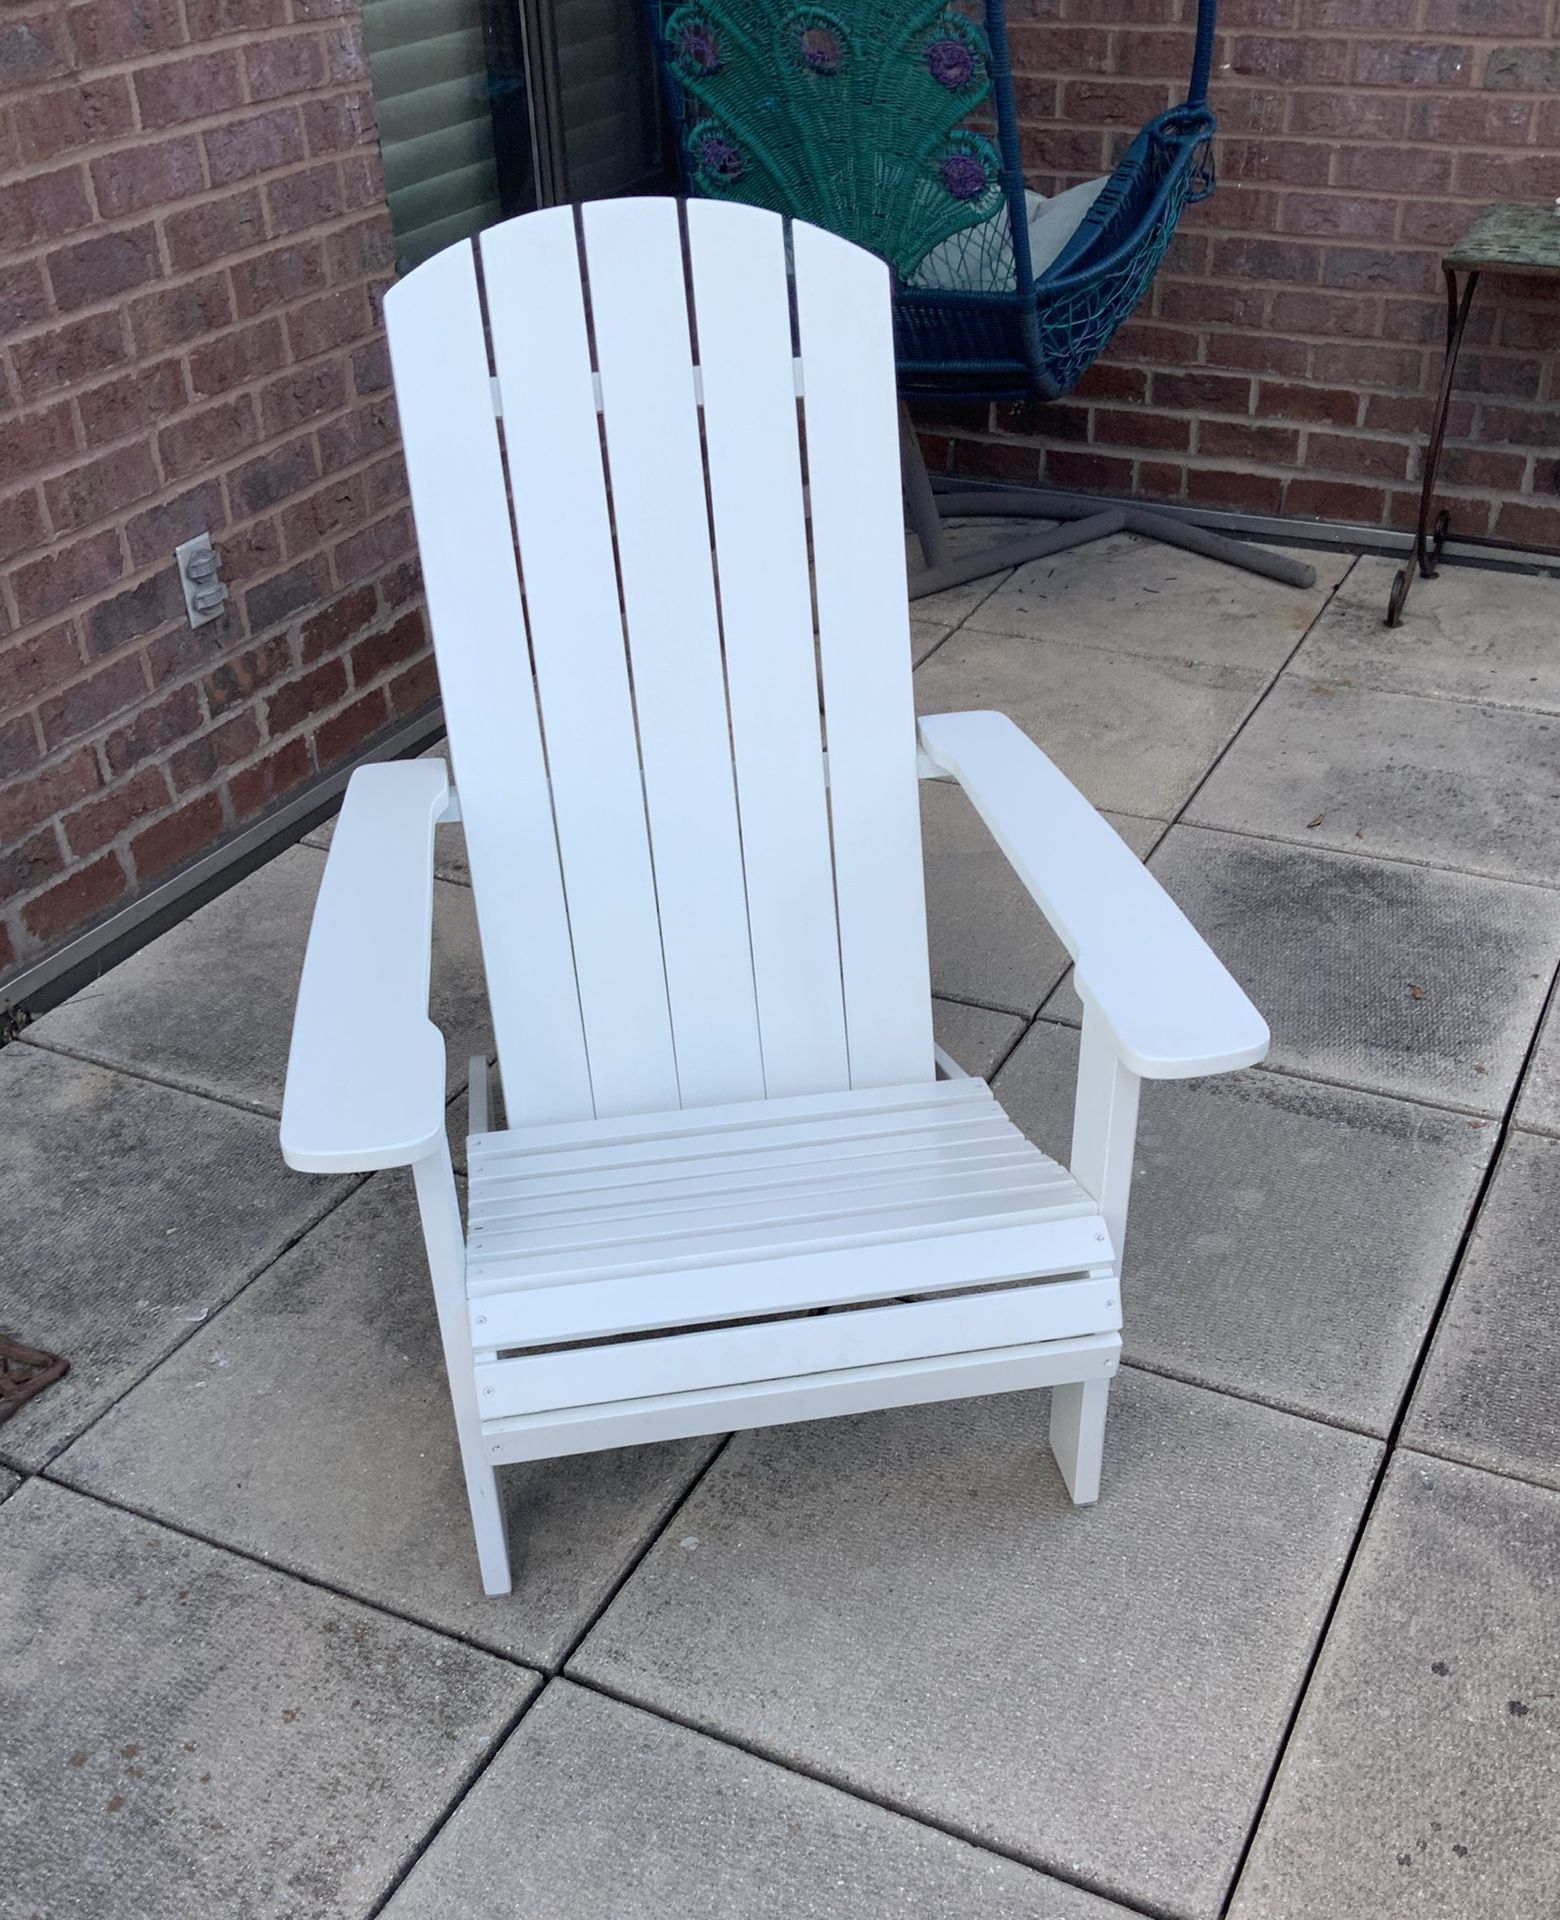 Pottery Barn Adirondack chairs 2 identical with Weather covers. Mint condition